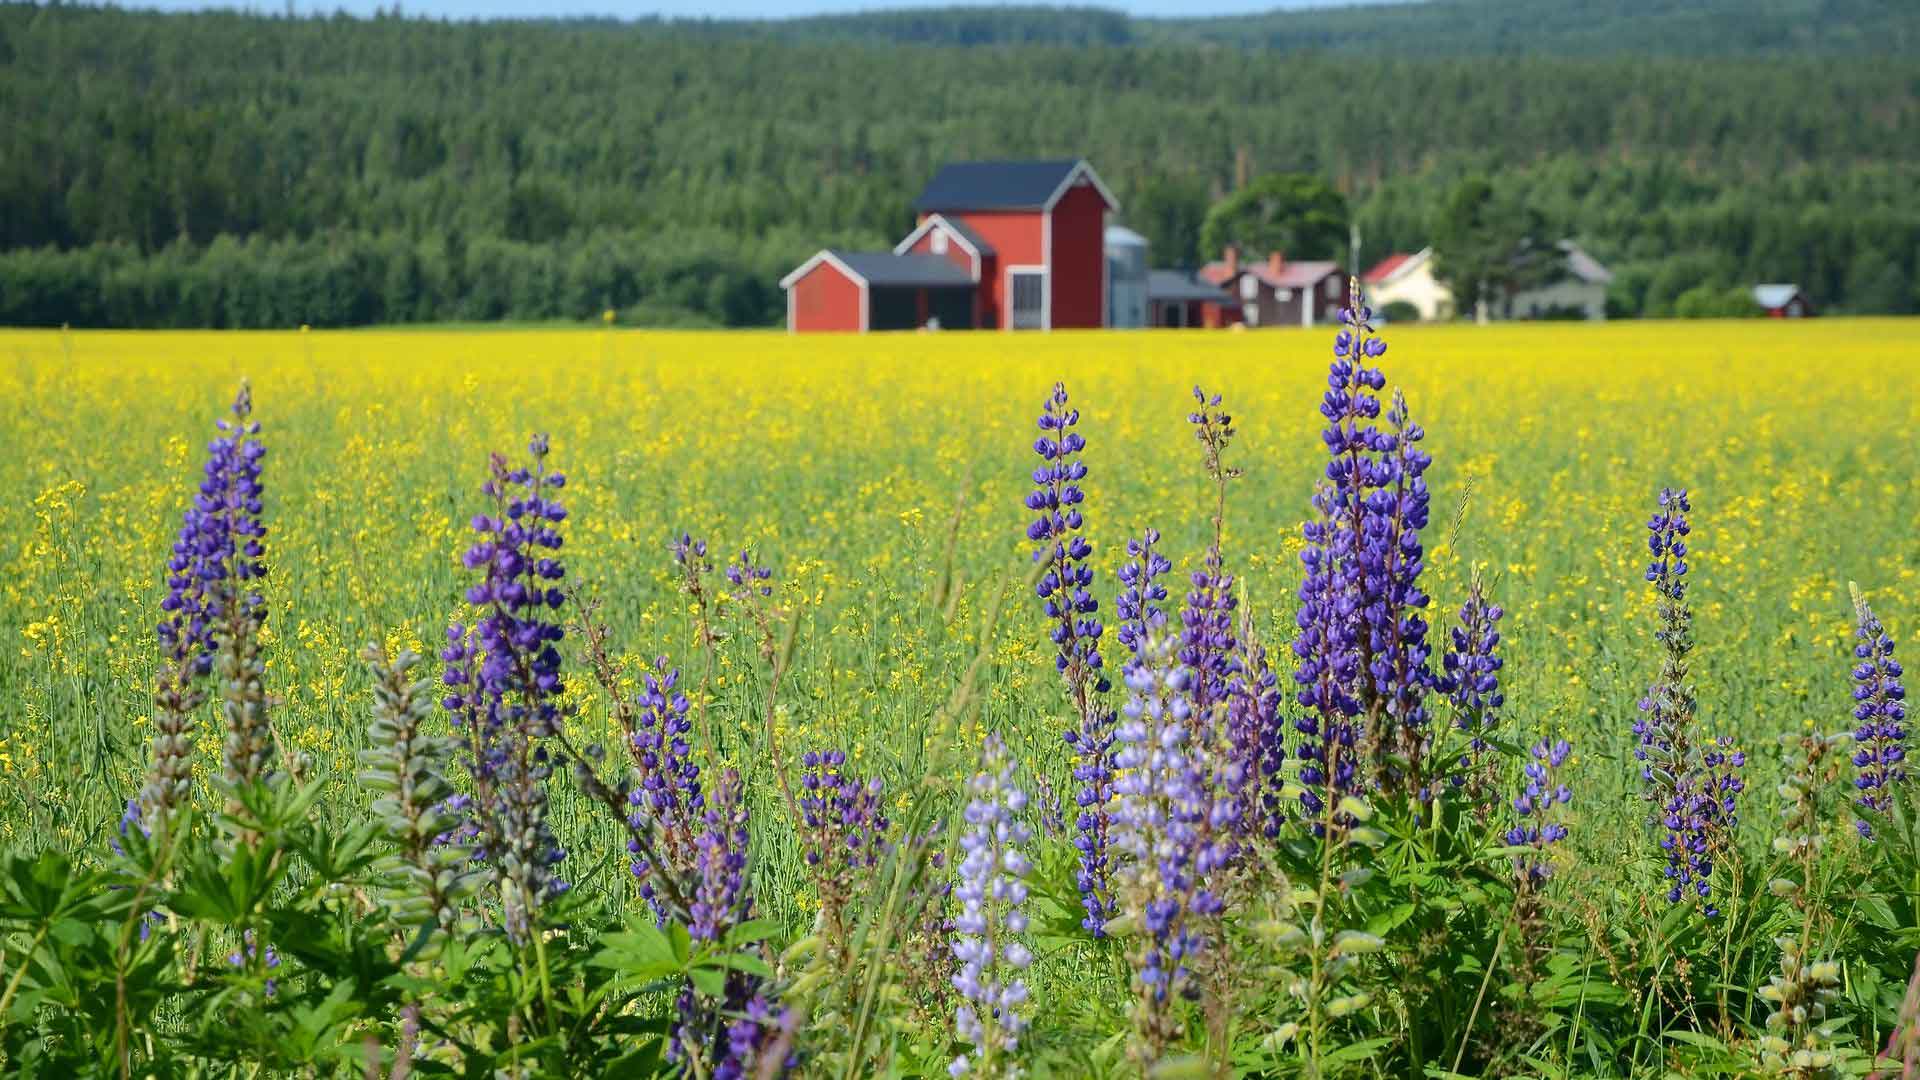 Countryside and flowers in Sweden